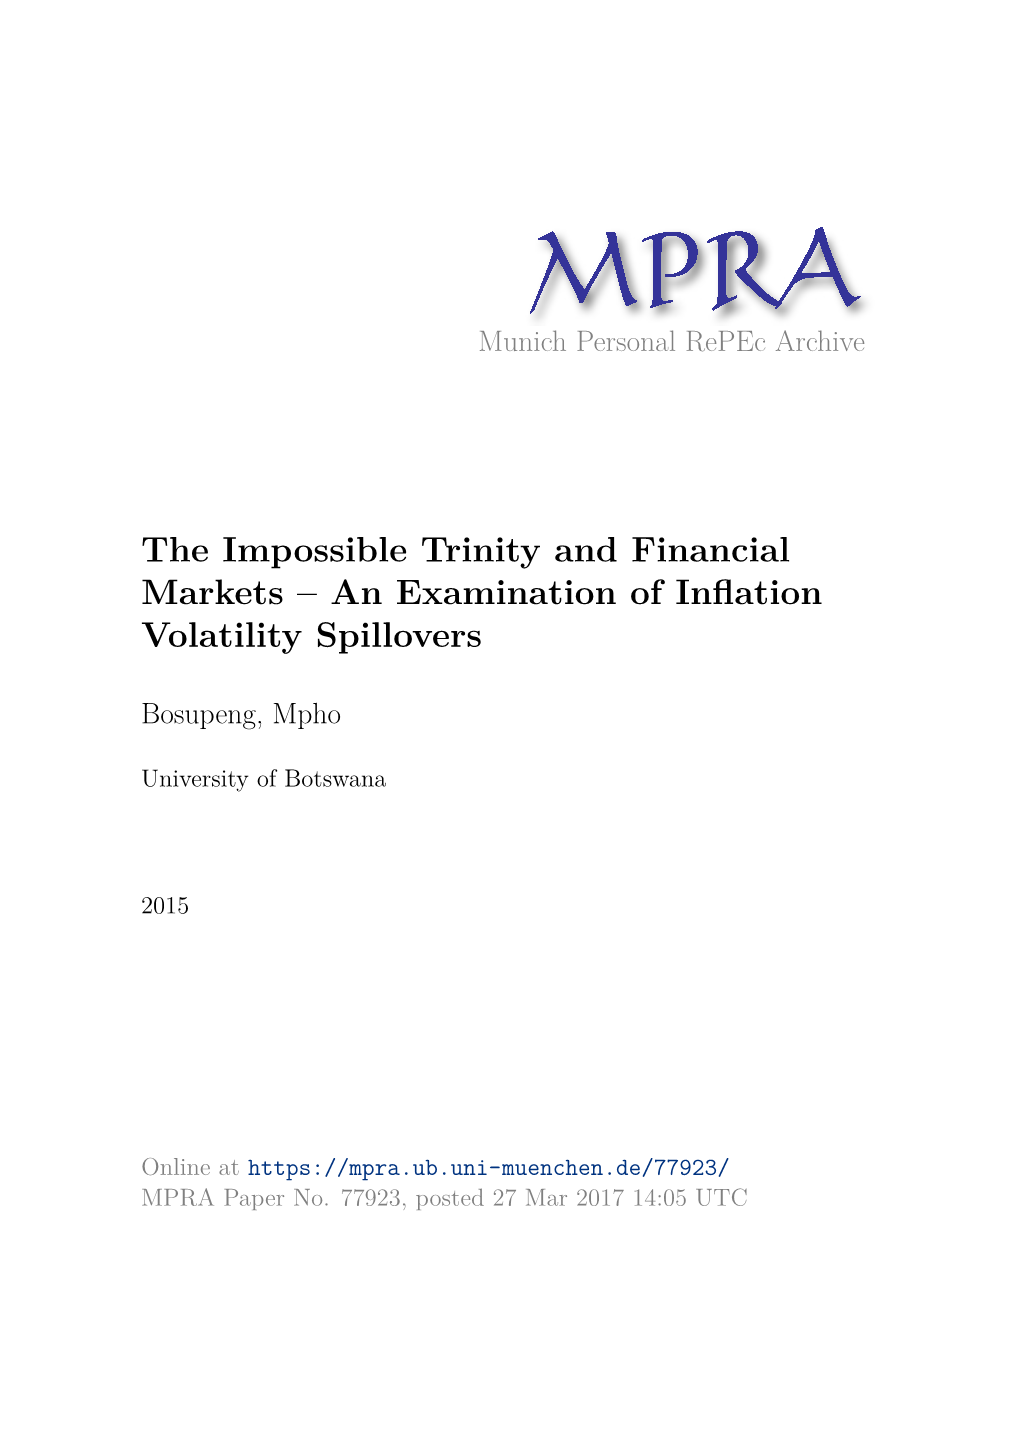 The Impossible Trinity and Financial Markets – an Examination of Inﬂation Volatility Spillovers